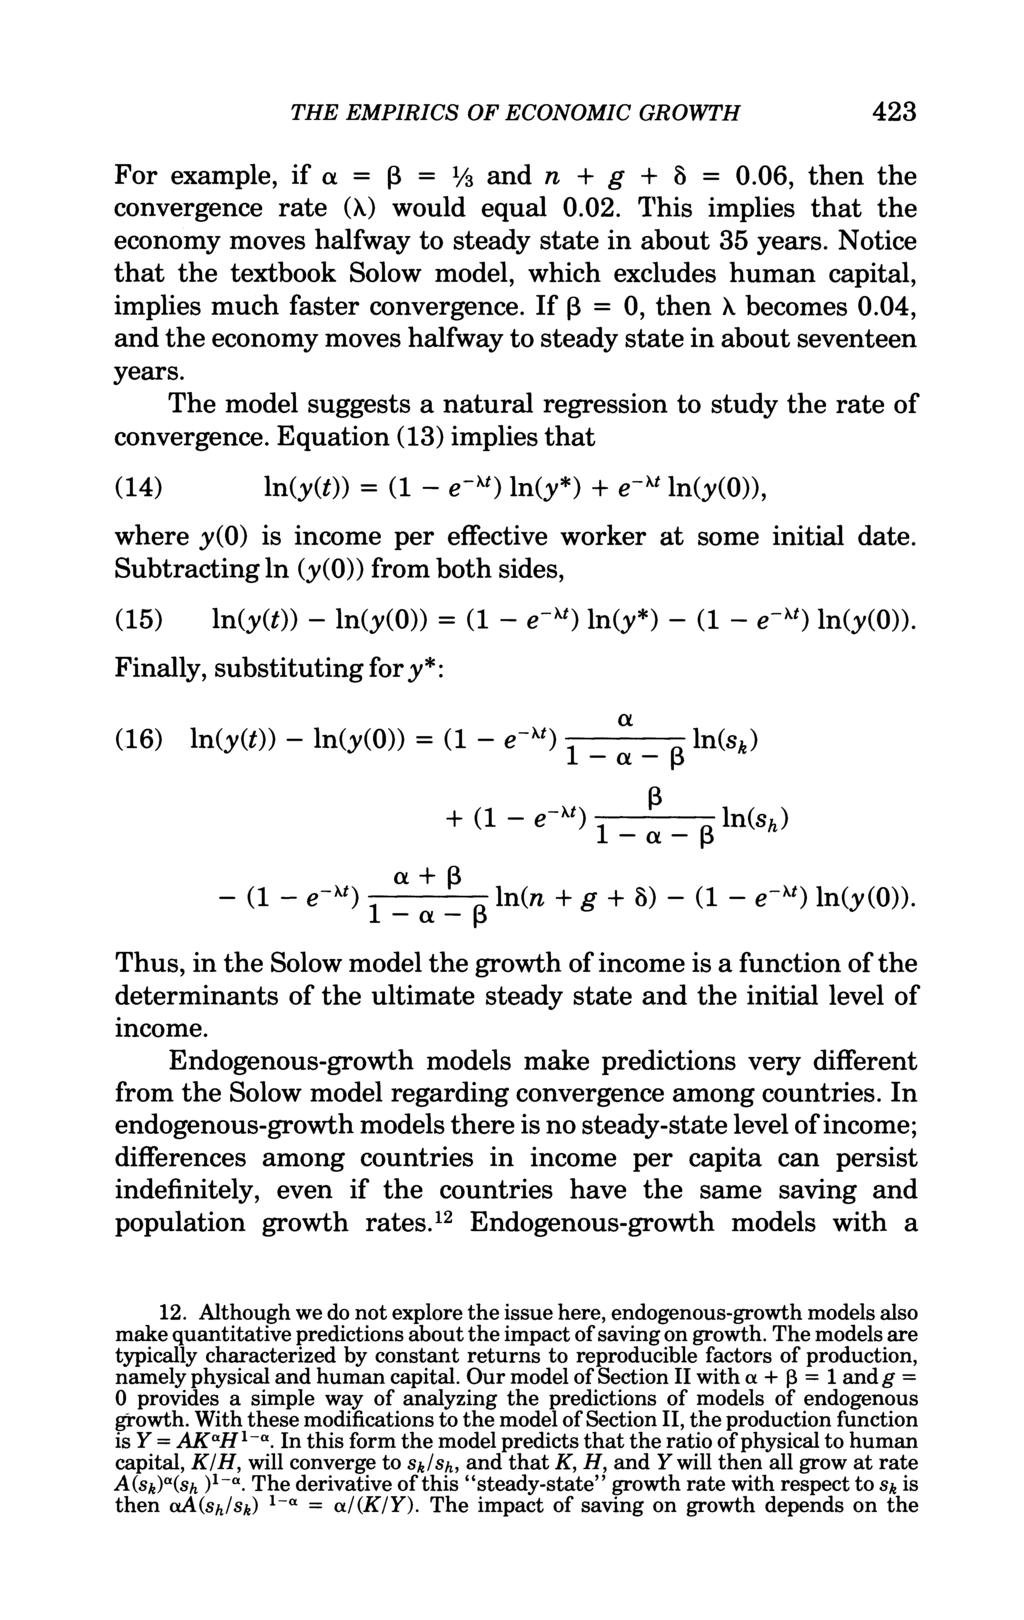 THE EMPIRICS OF ECONOMIC GROWTH 423 For example, if a = P = 1/3 and n + g + 8 = 0.06, then the convergence rate (A) would equal 0.02.